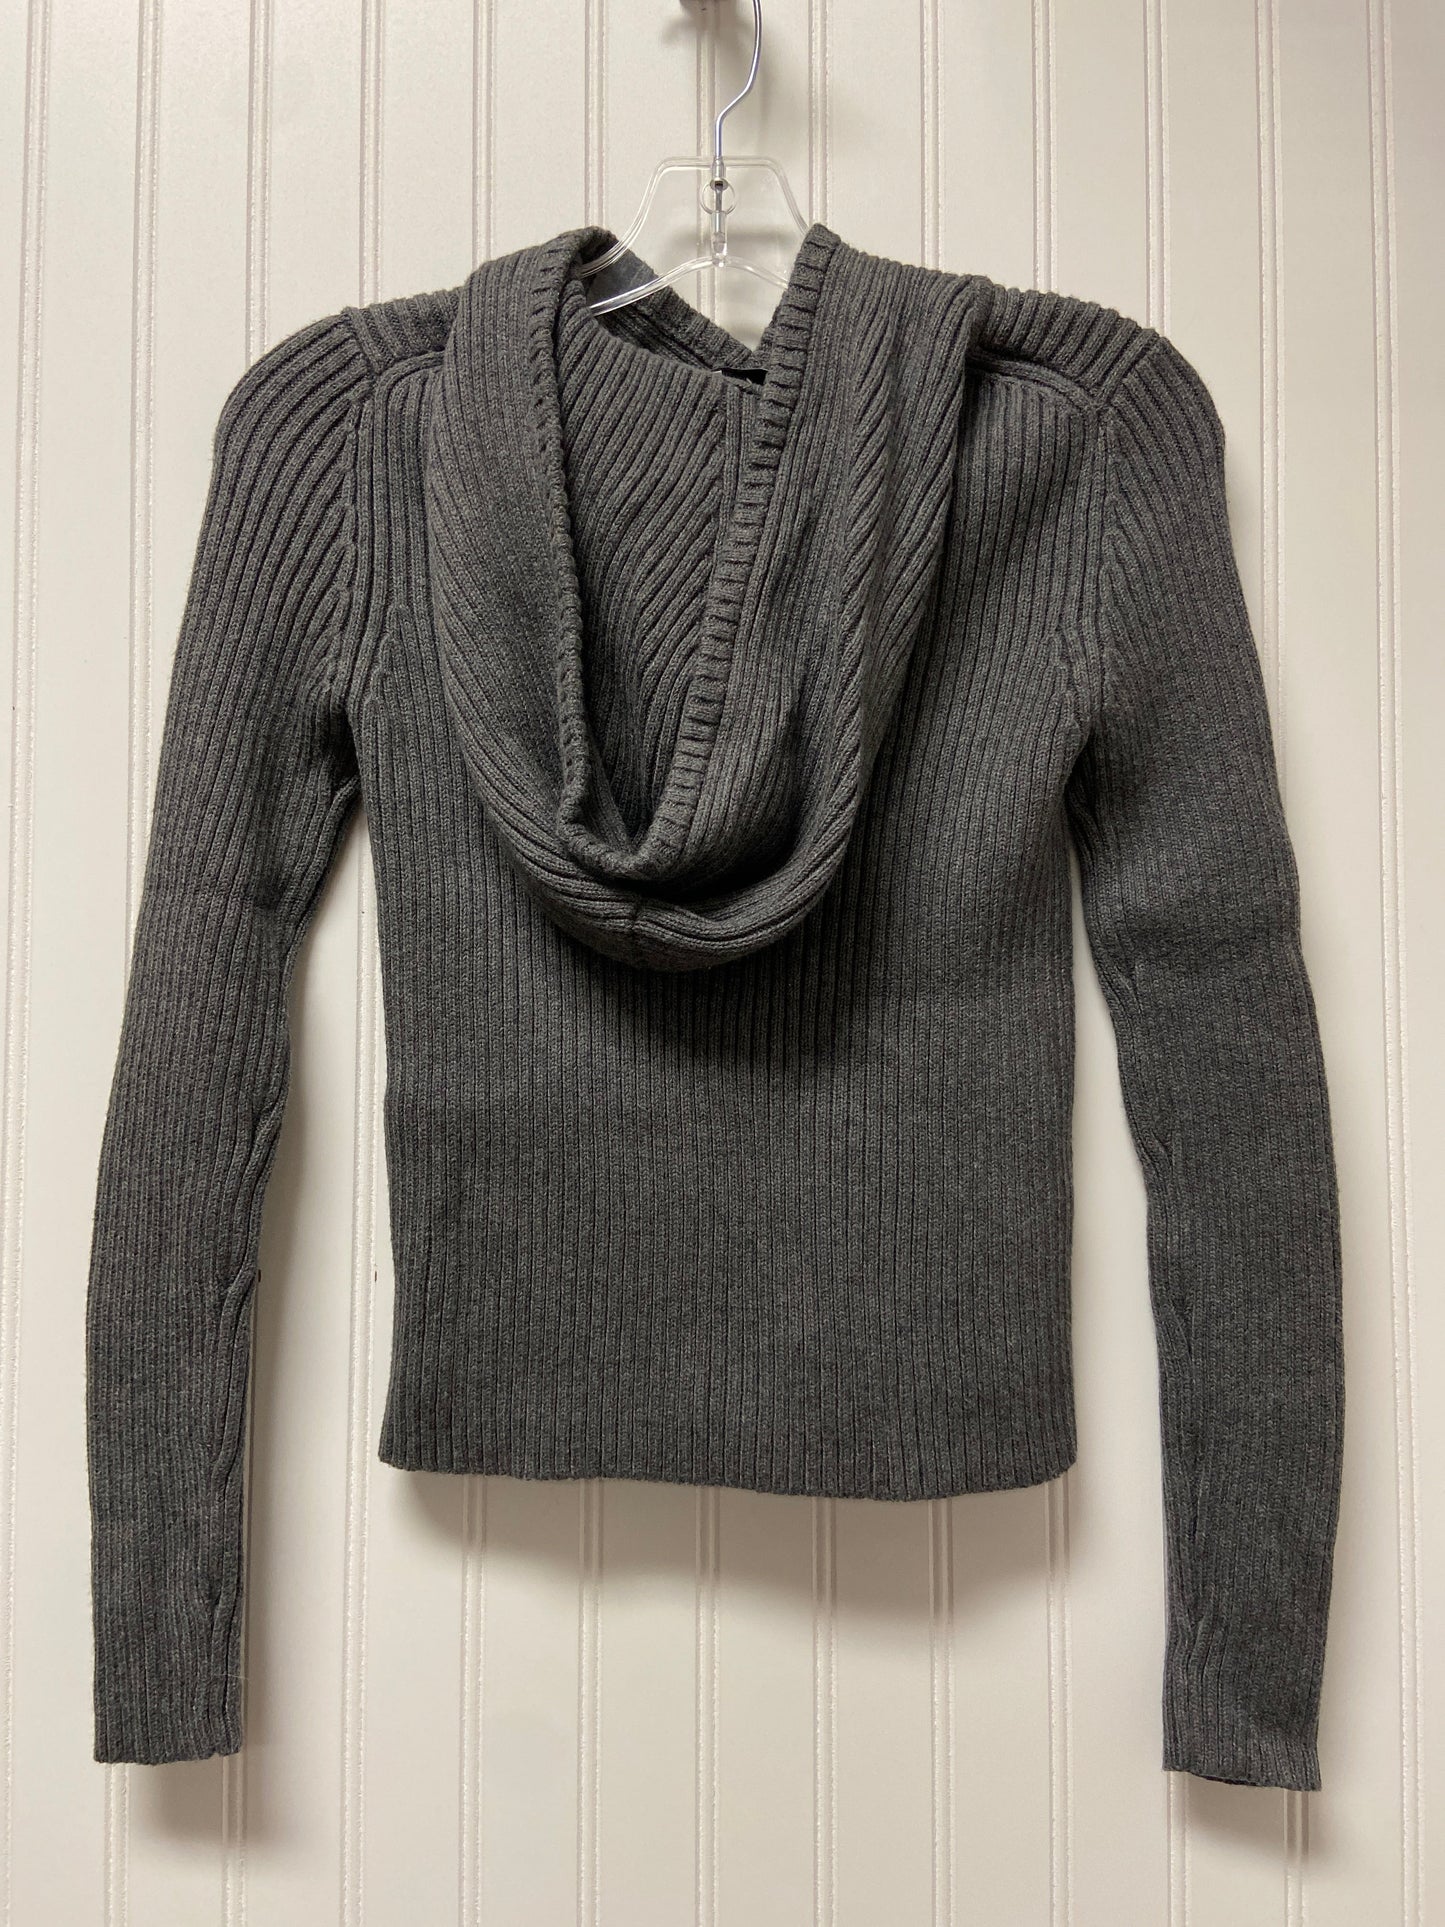 Grey Sweater Clothes Mentor, Size Xs